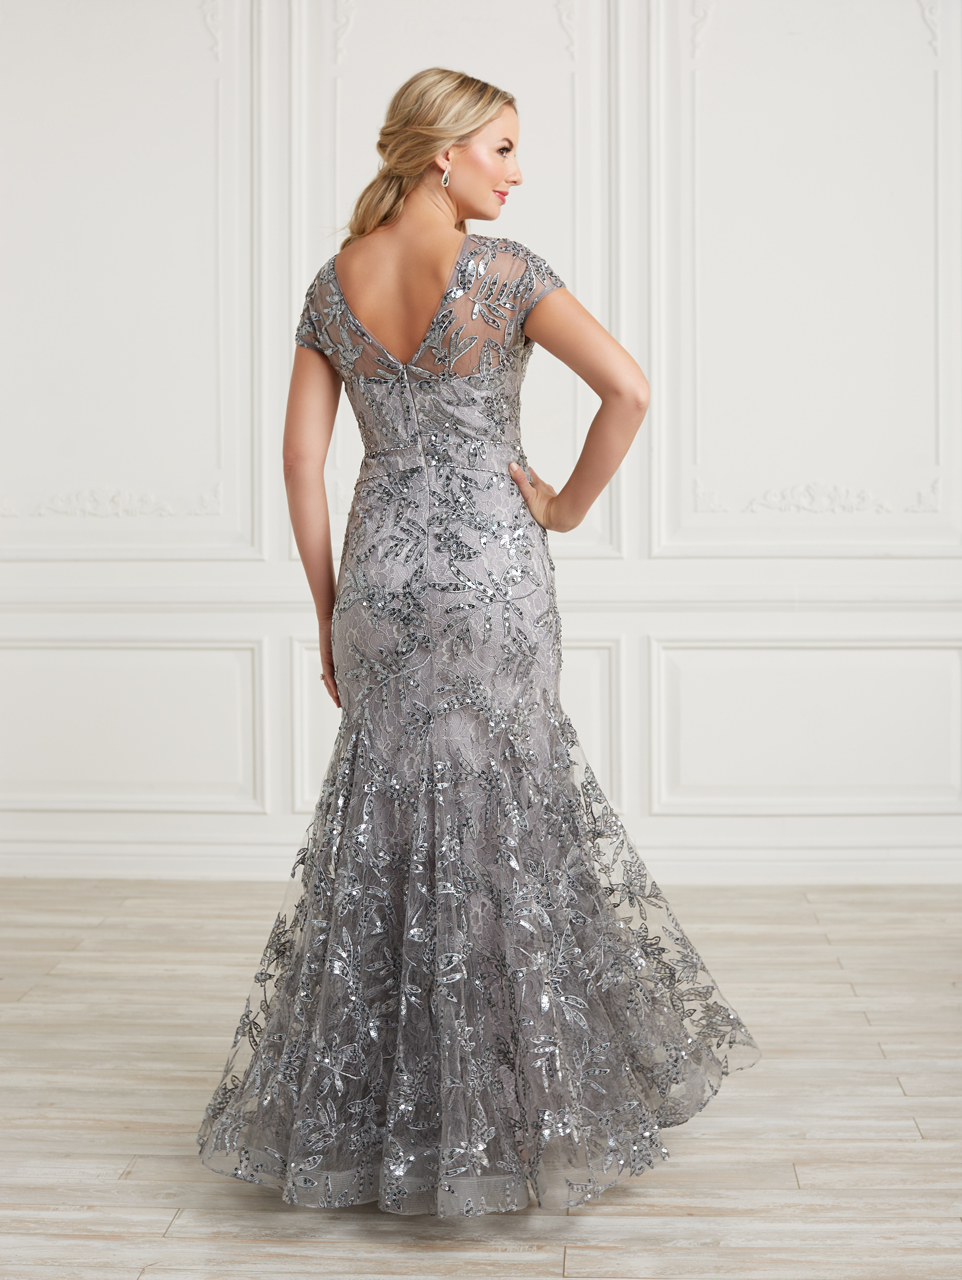 Flourish in this Detailed Mother's Gown - Bridal and Formal